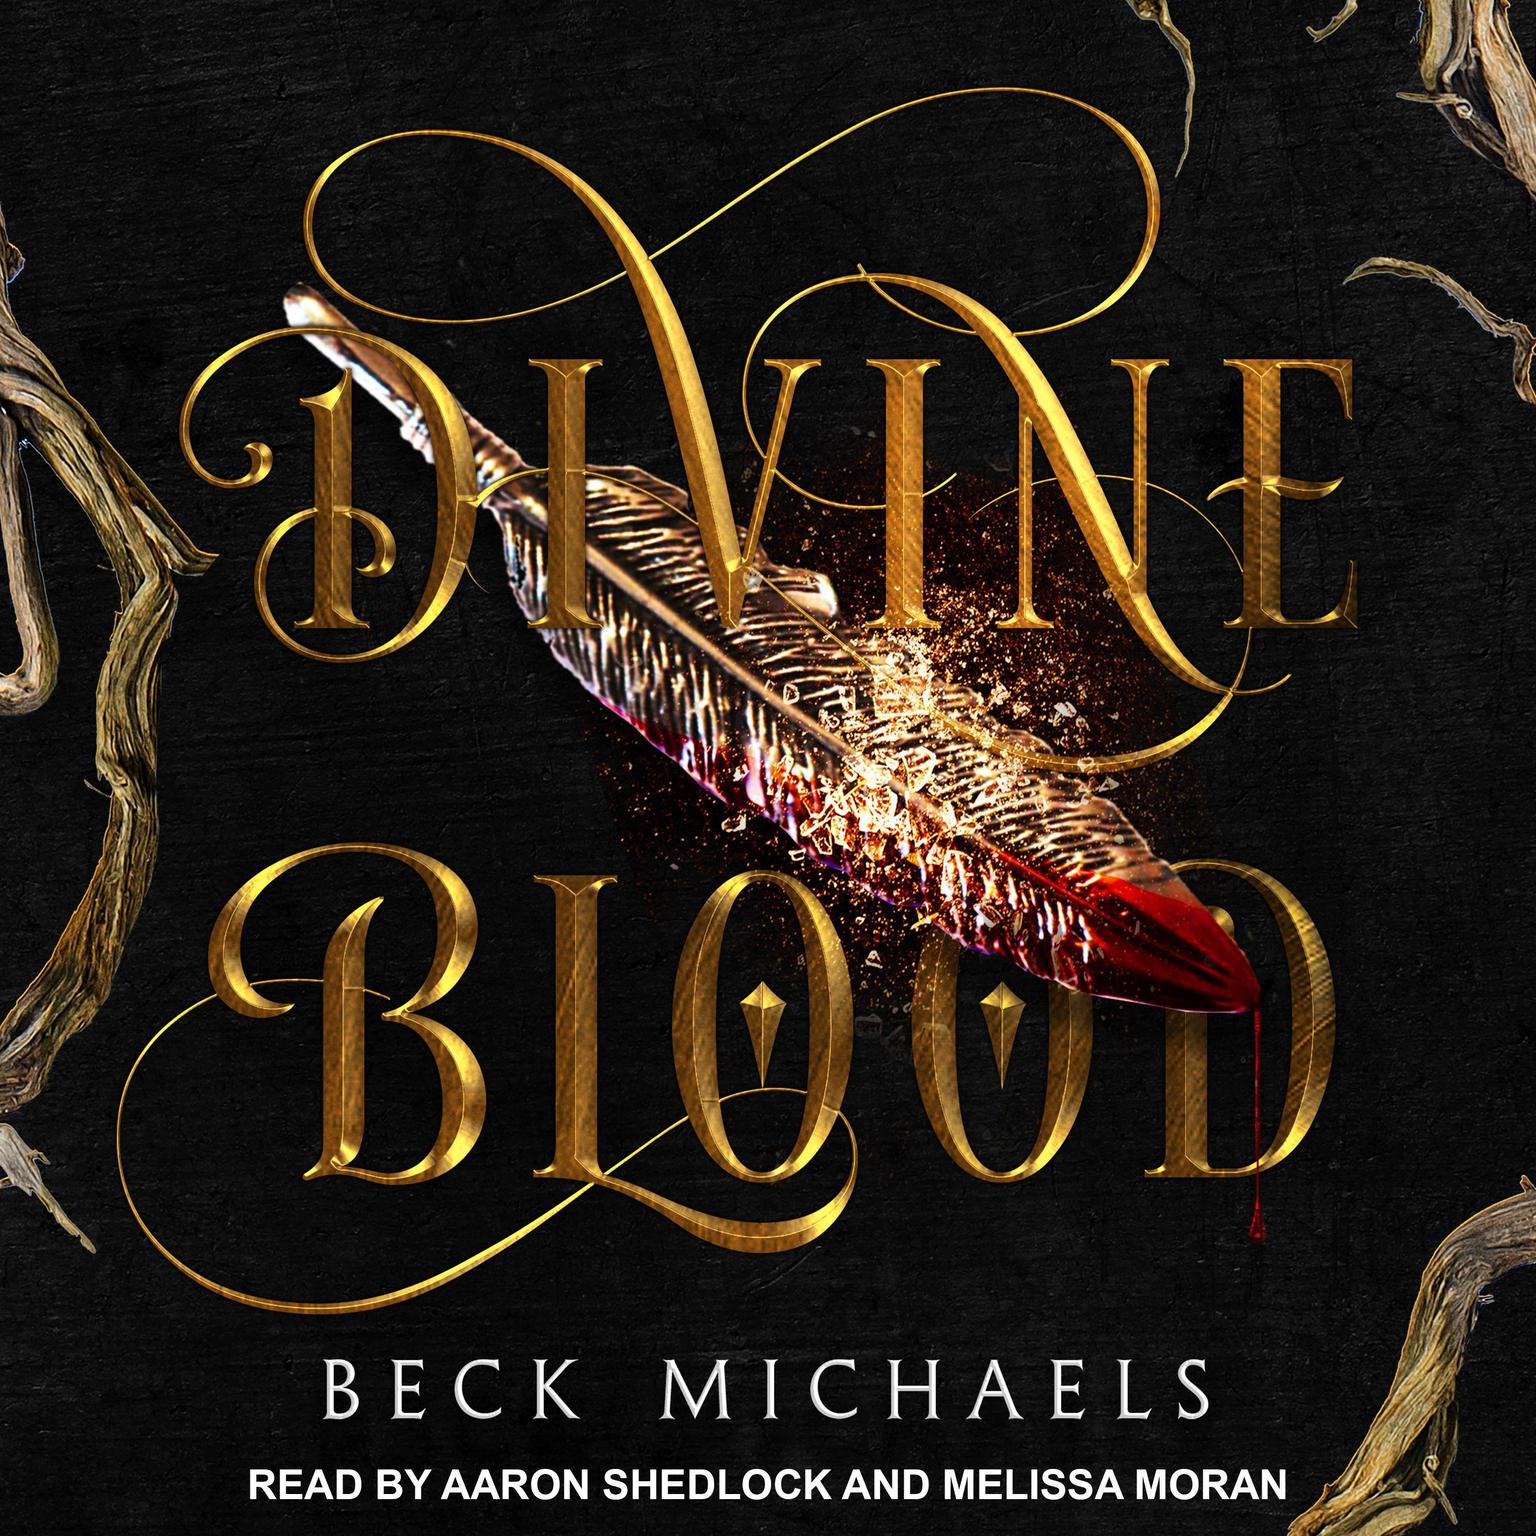 Divine Blood Audiobook, by Beck Michaels